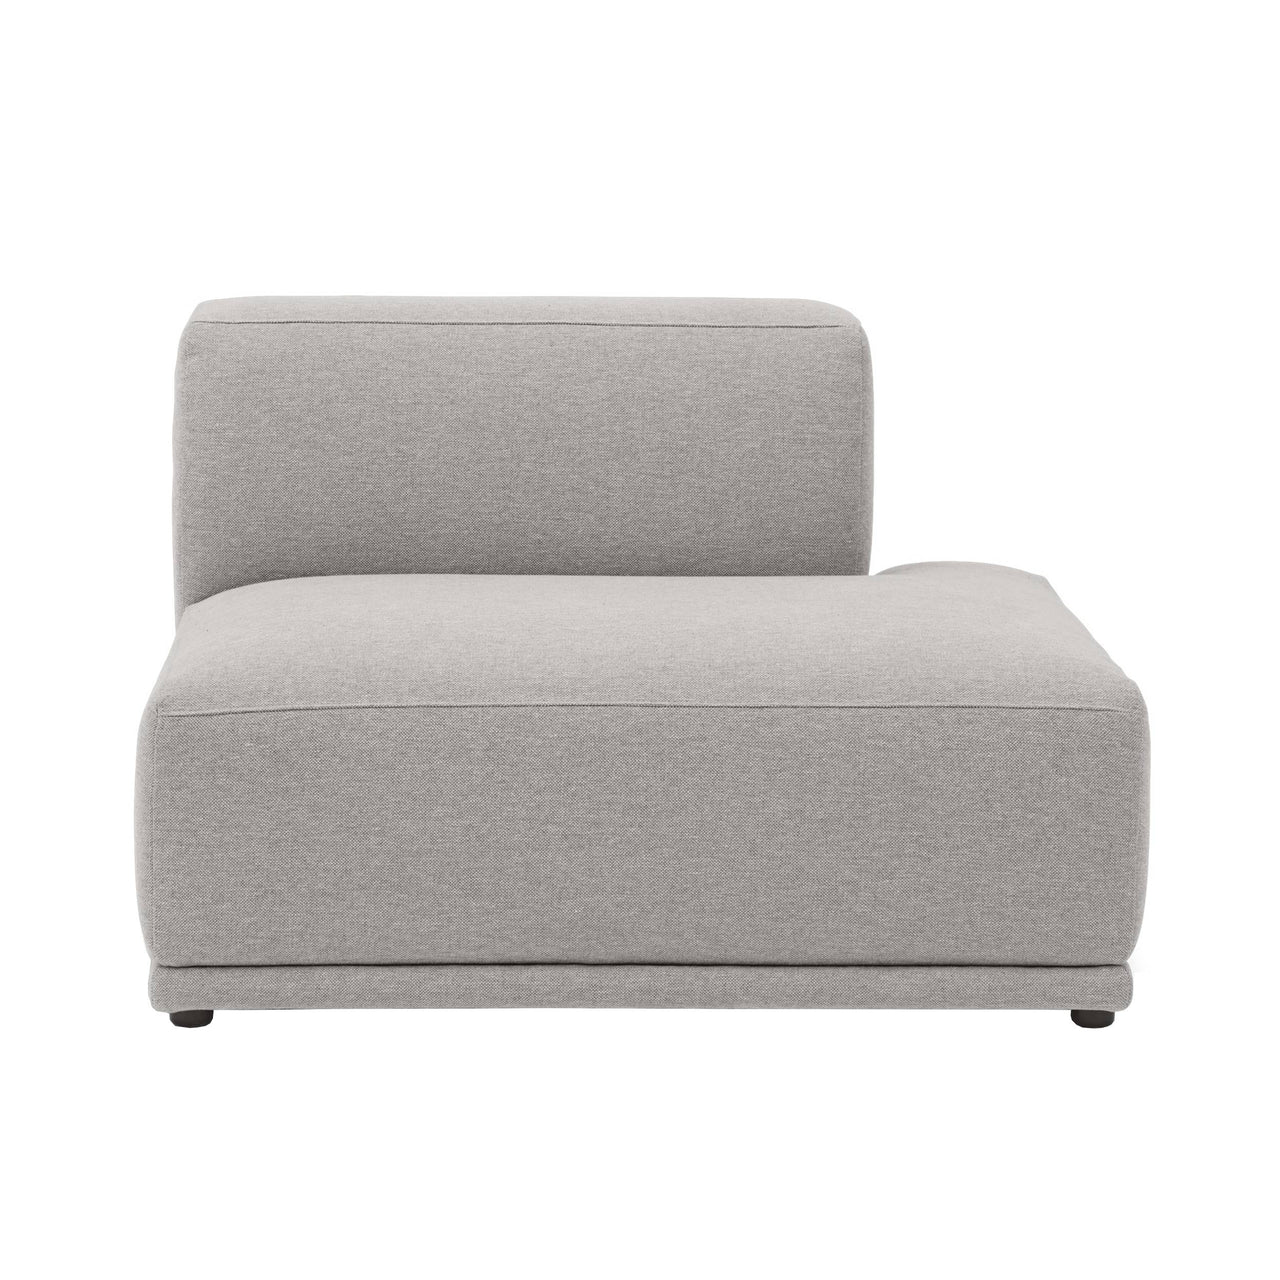 Connect Soft Sofa Modules: Right Open-Ended D + Clay 12